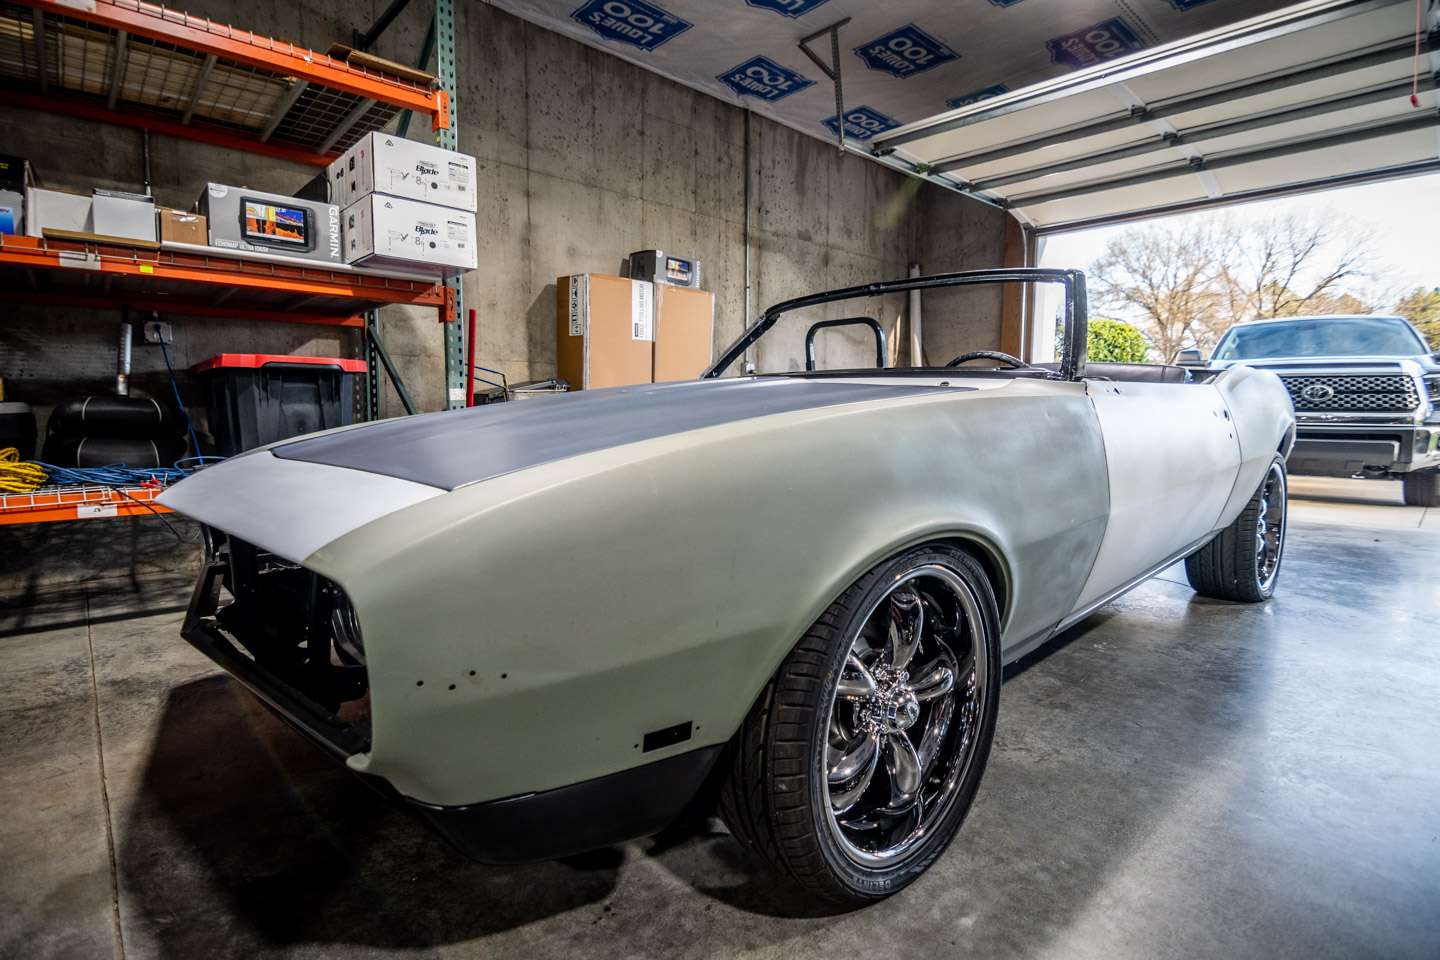 His more recent project is this 1969 Camaro convertible. The car remains in the early stages of restoration with body, engine and suspension work still ahead.